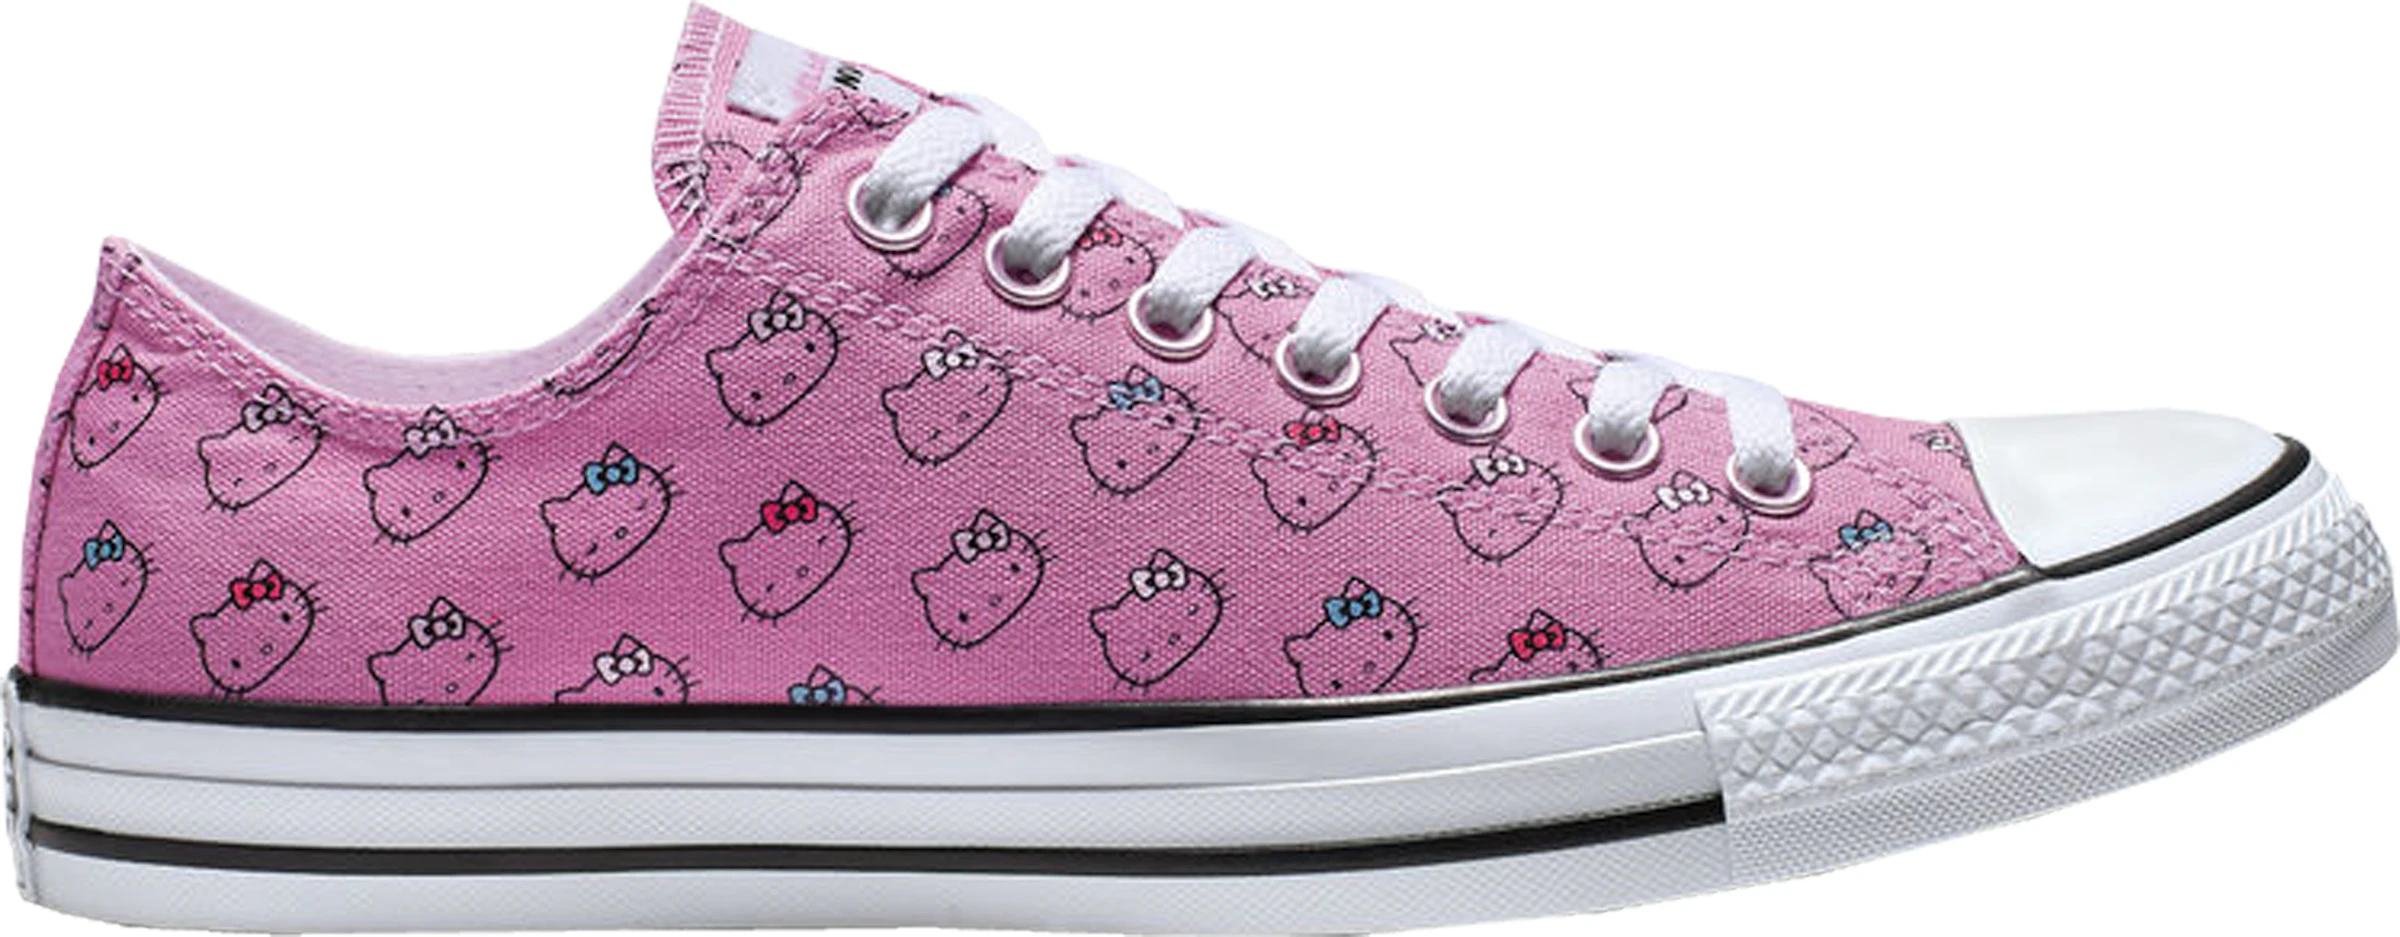 Converse Taylor All-Star Ox Kitty Pink - ES